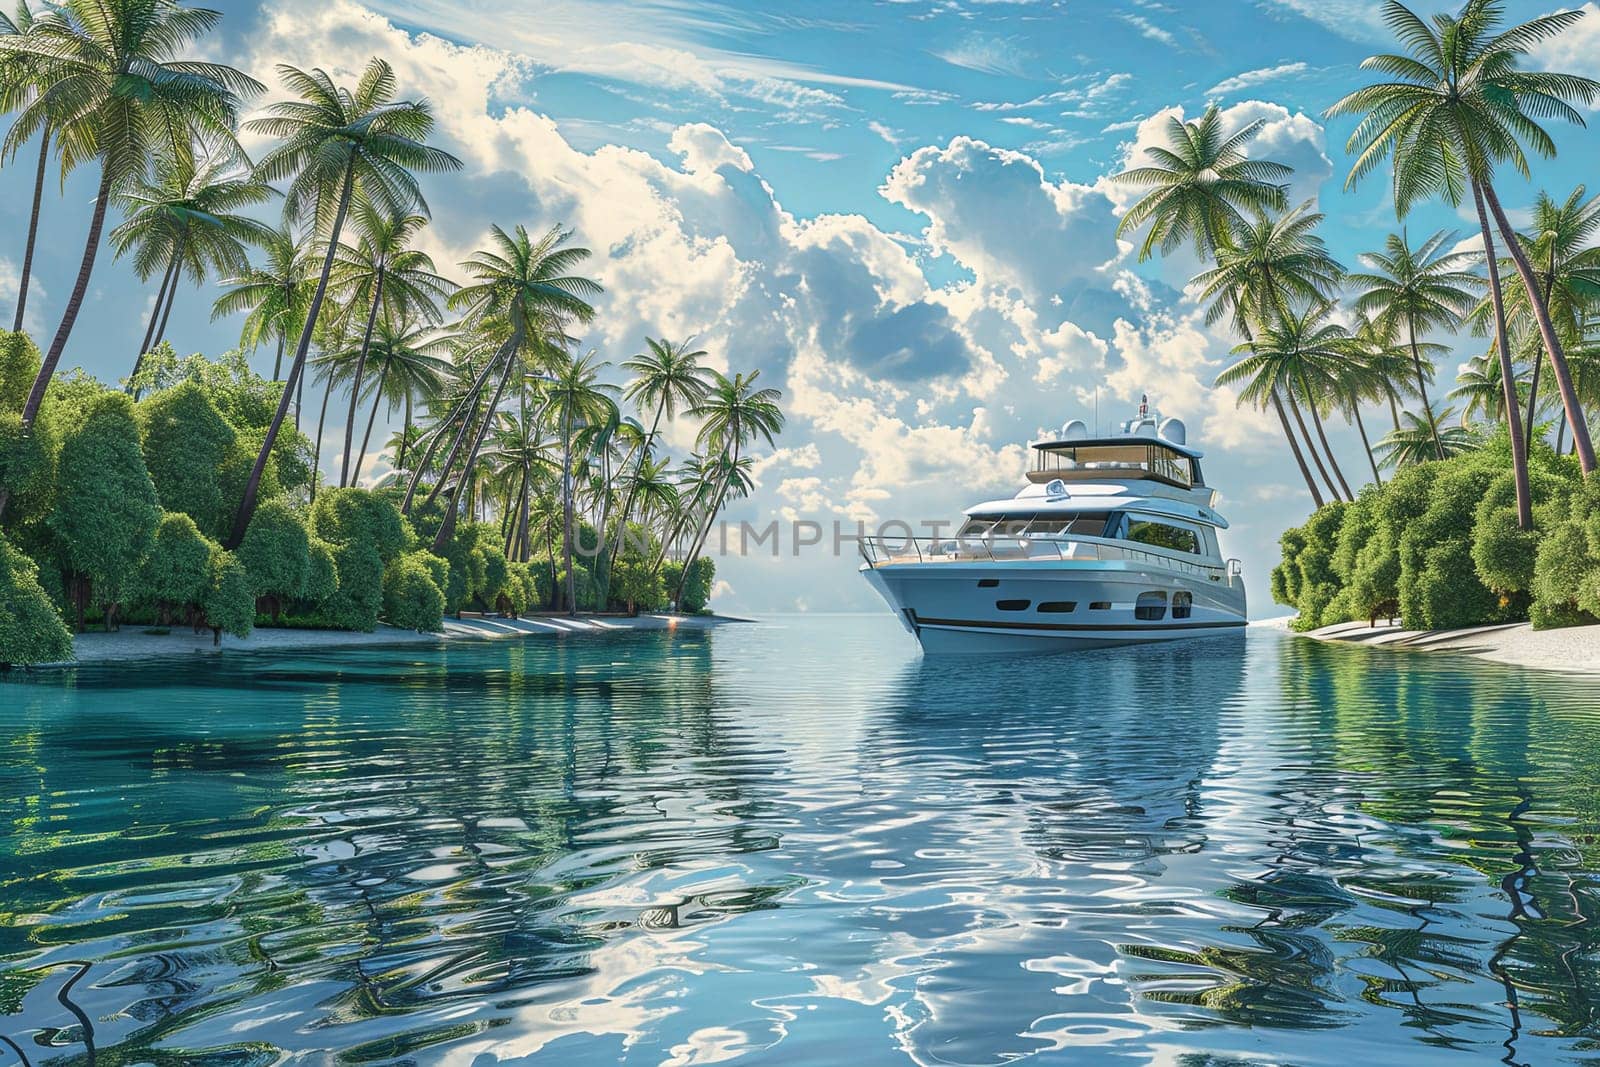 A grand cruise ship sails gracefully through the turquoise waters of the ocean, surrounded by lush palm trees swaying in the gentle breeze.